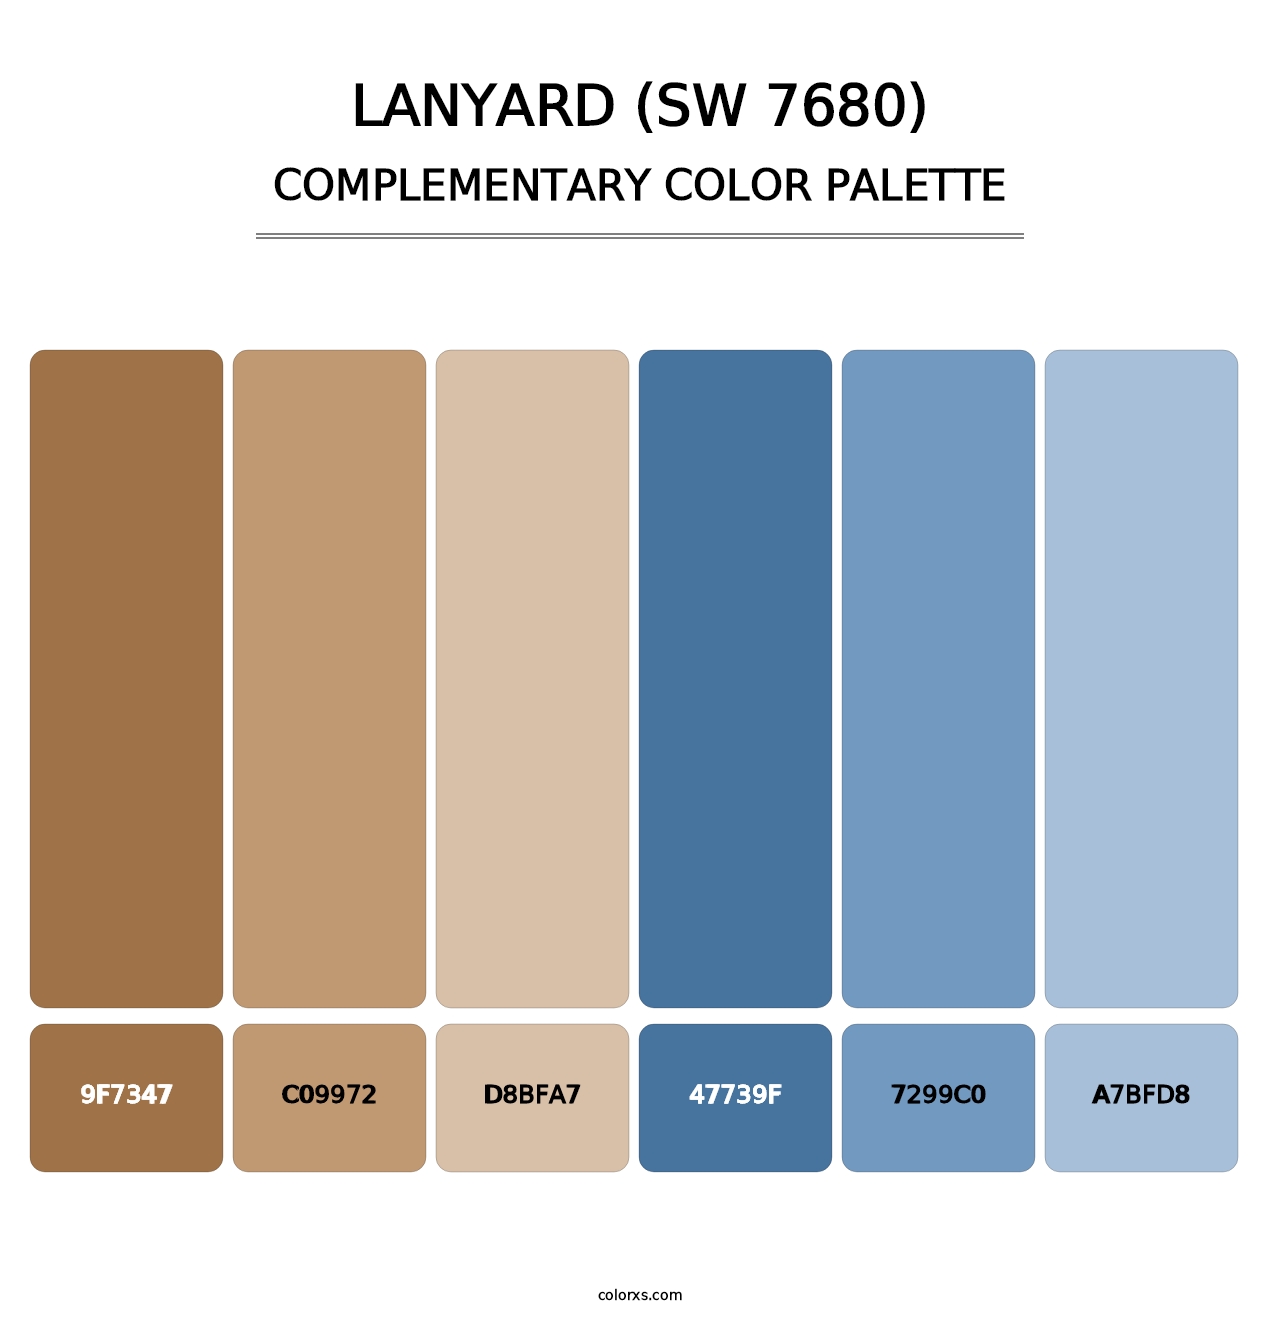 Lanyard (SW 7680) - Complementary Color Palette